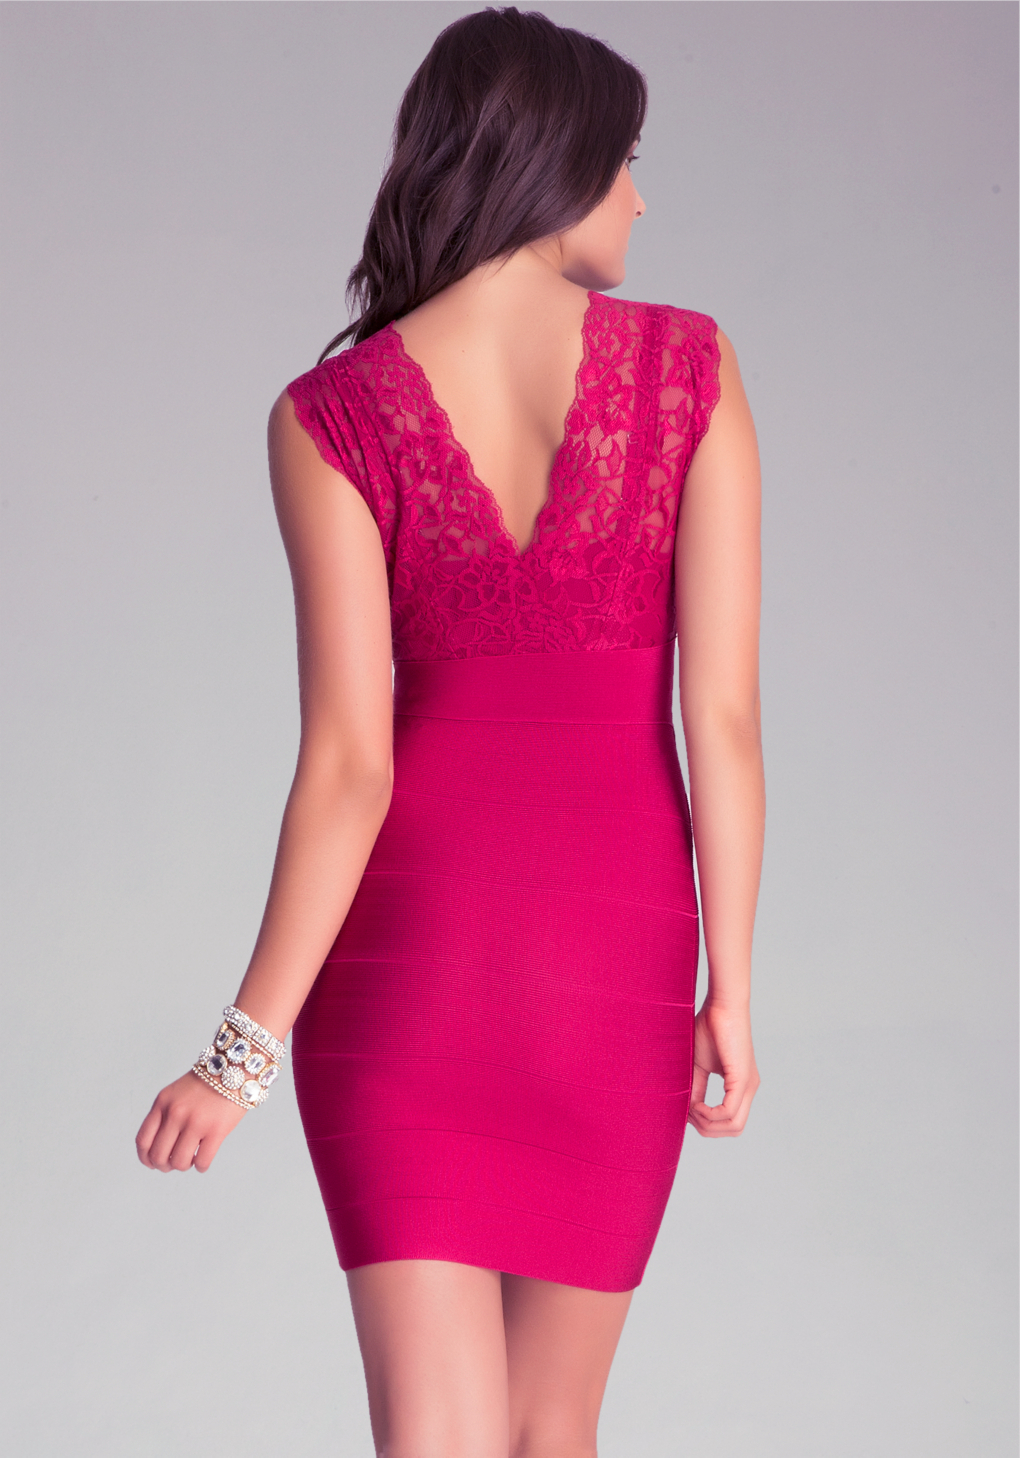 Lyst - Bebe Cutout Lace Bandage Dress in Red